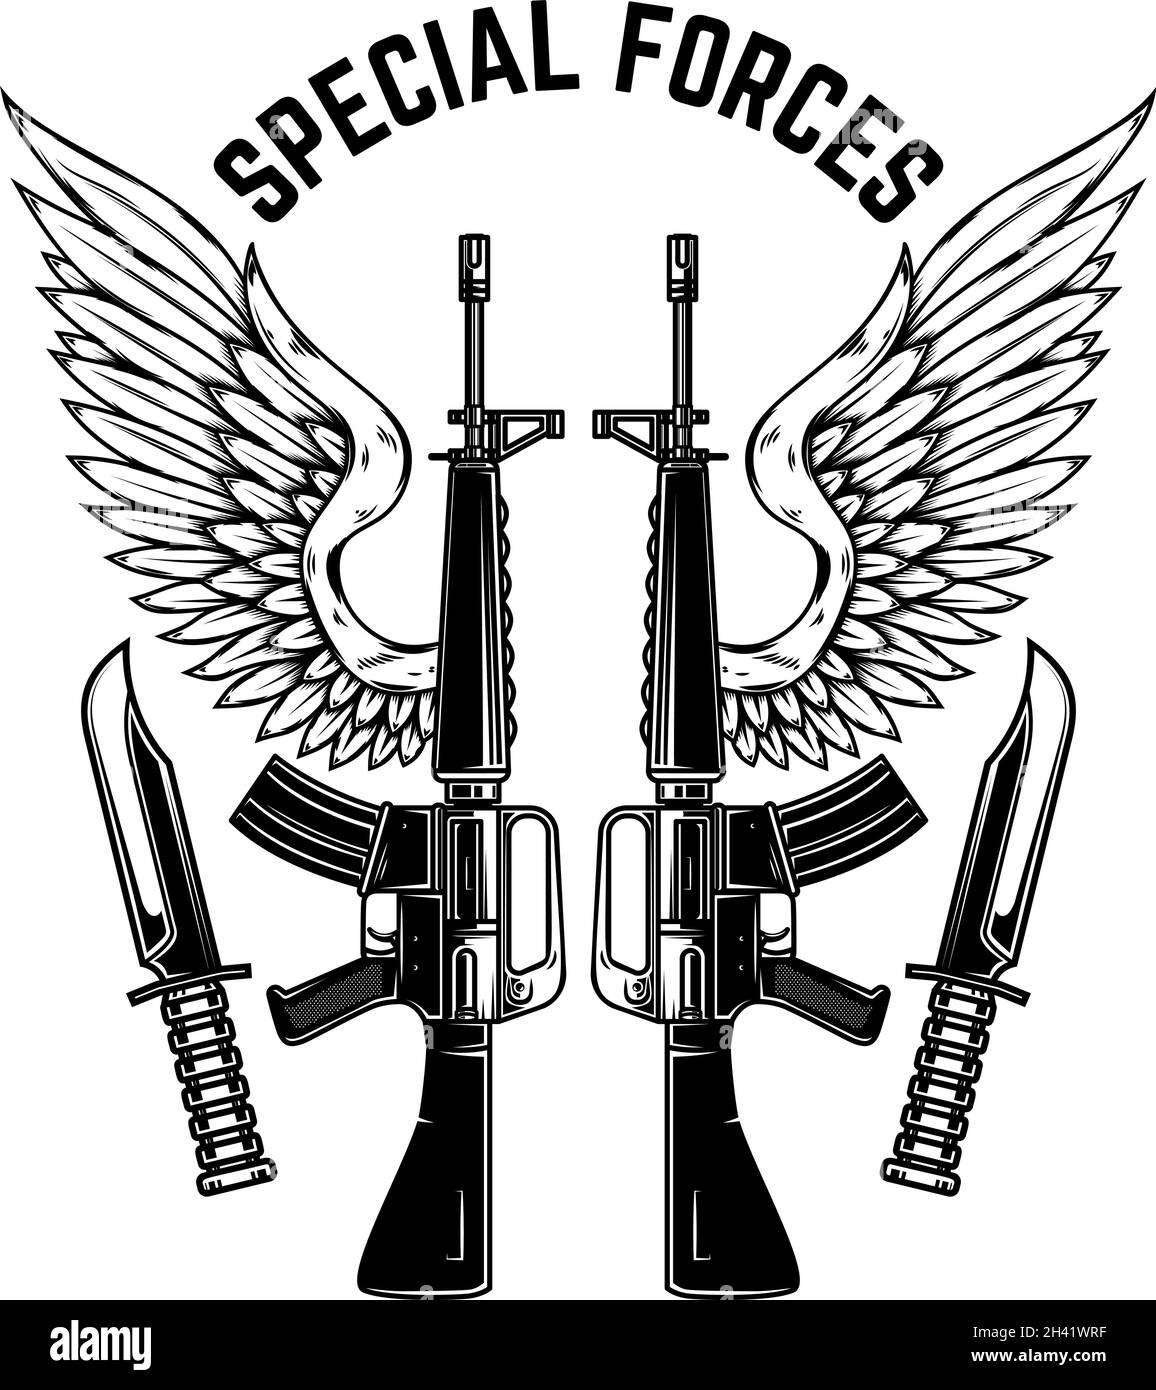 Special forces. m16 assault rifles with wings. Design element for logo, label, sign, emblem. Vector illustration Stock Vector